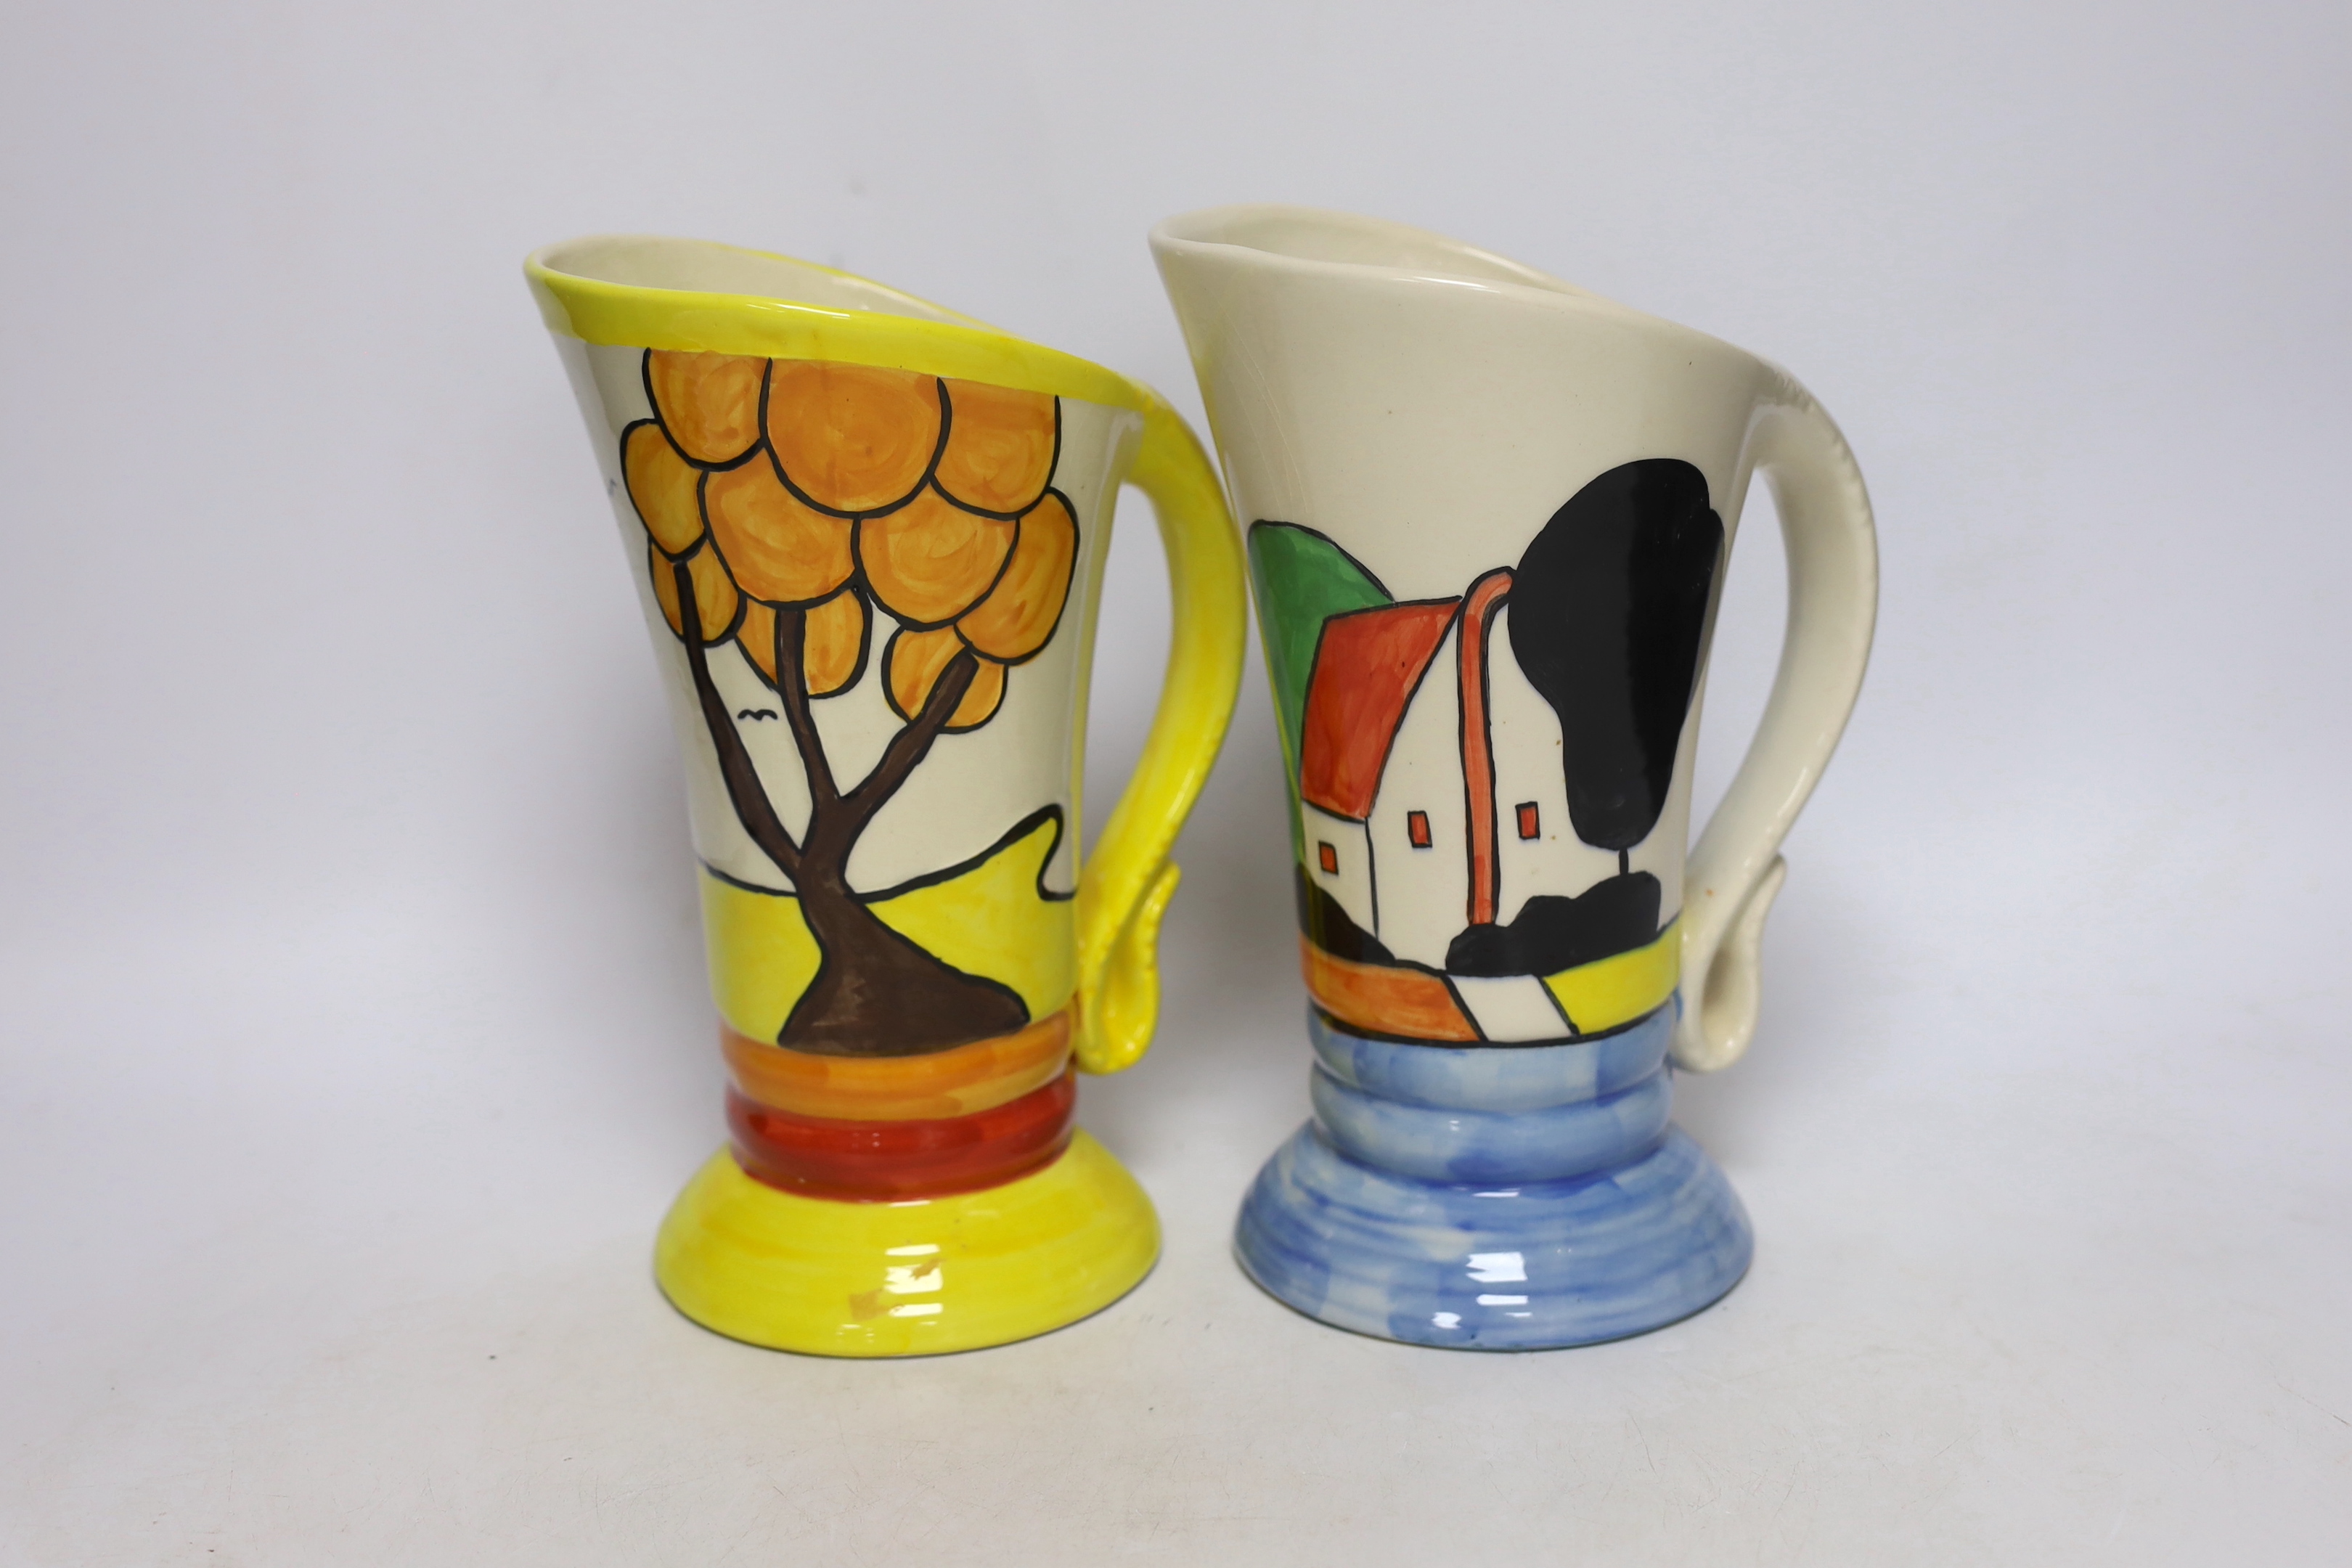 A Bernadette Eve Staffordshire jug, hand painted by Ty Will ‘Gardens’ and a similar Devon Ware jug, both in Clarice Cliff style, 23cm